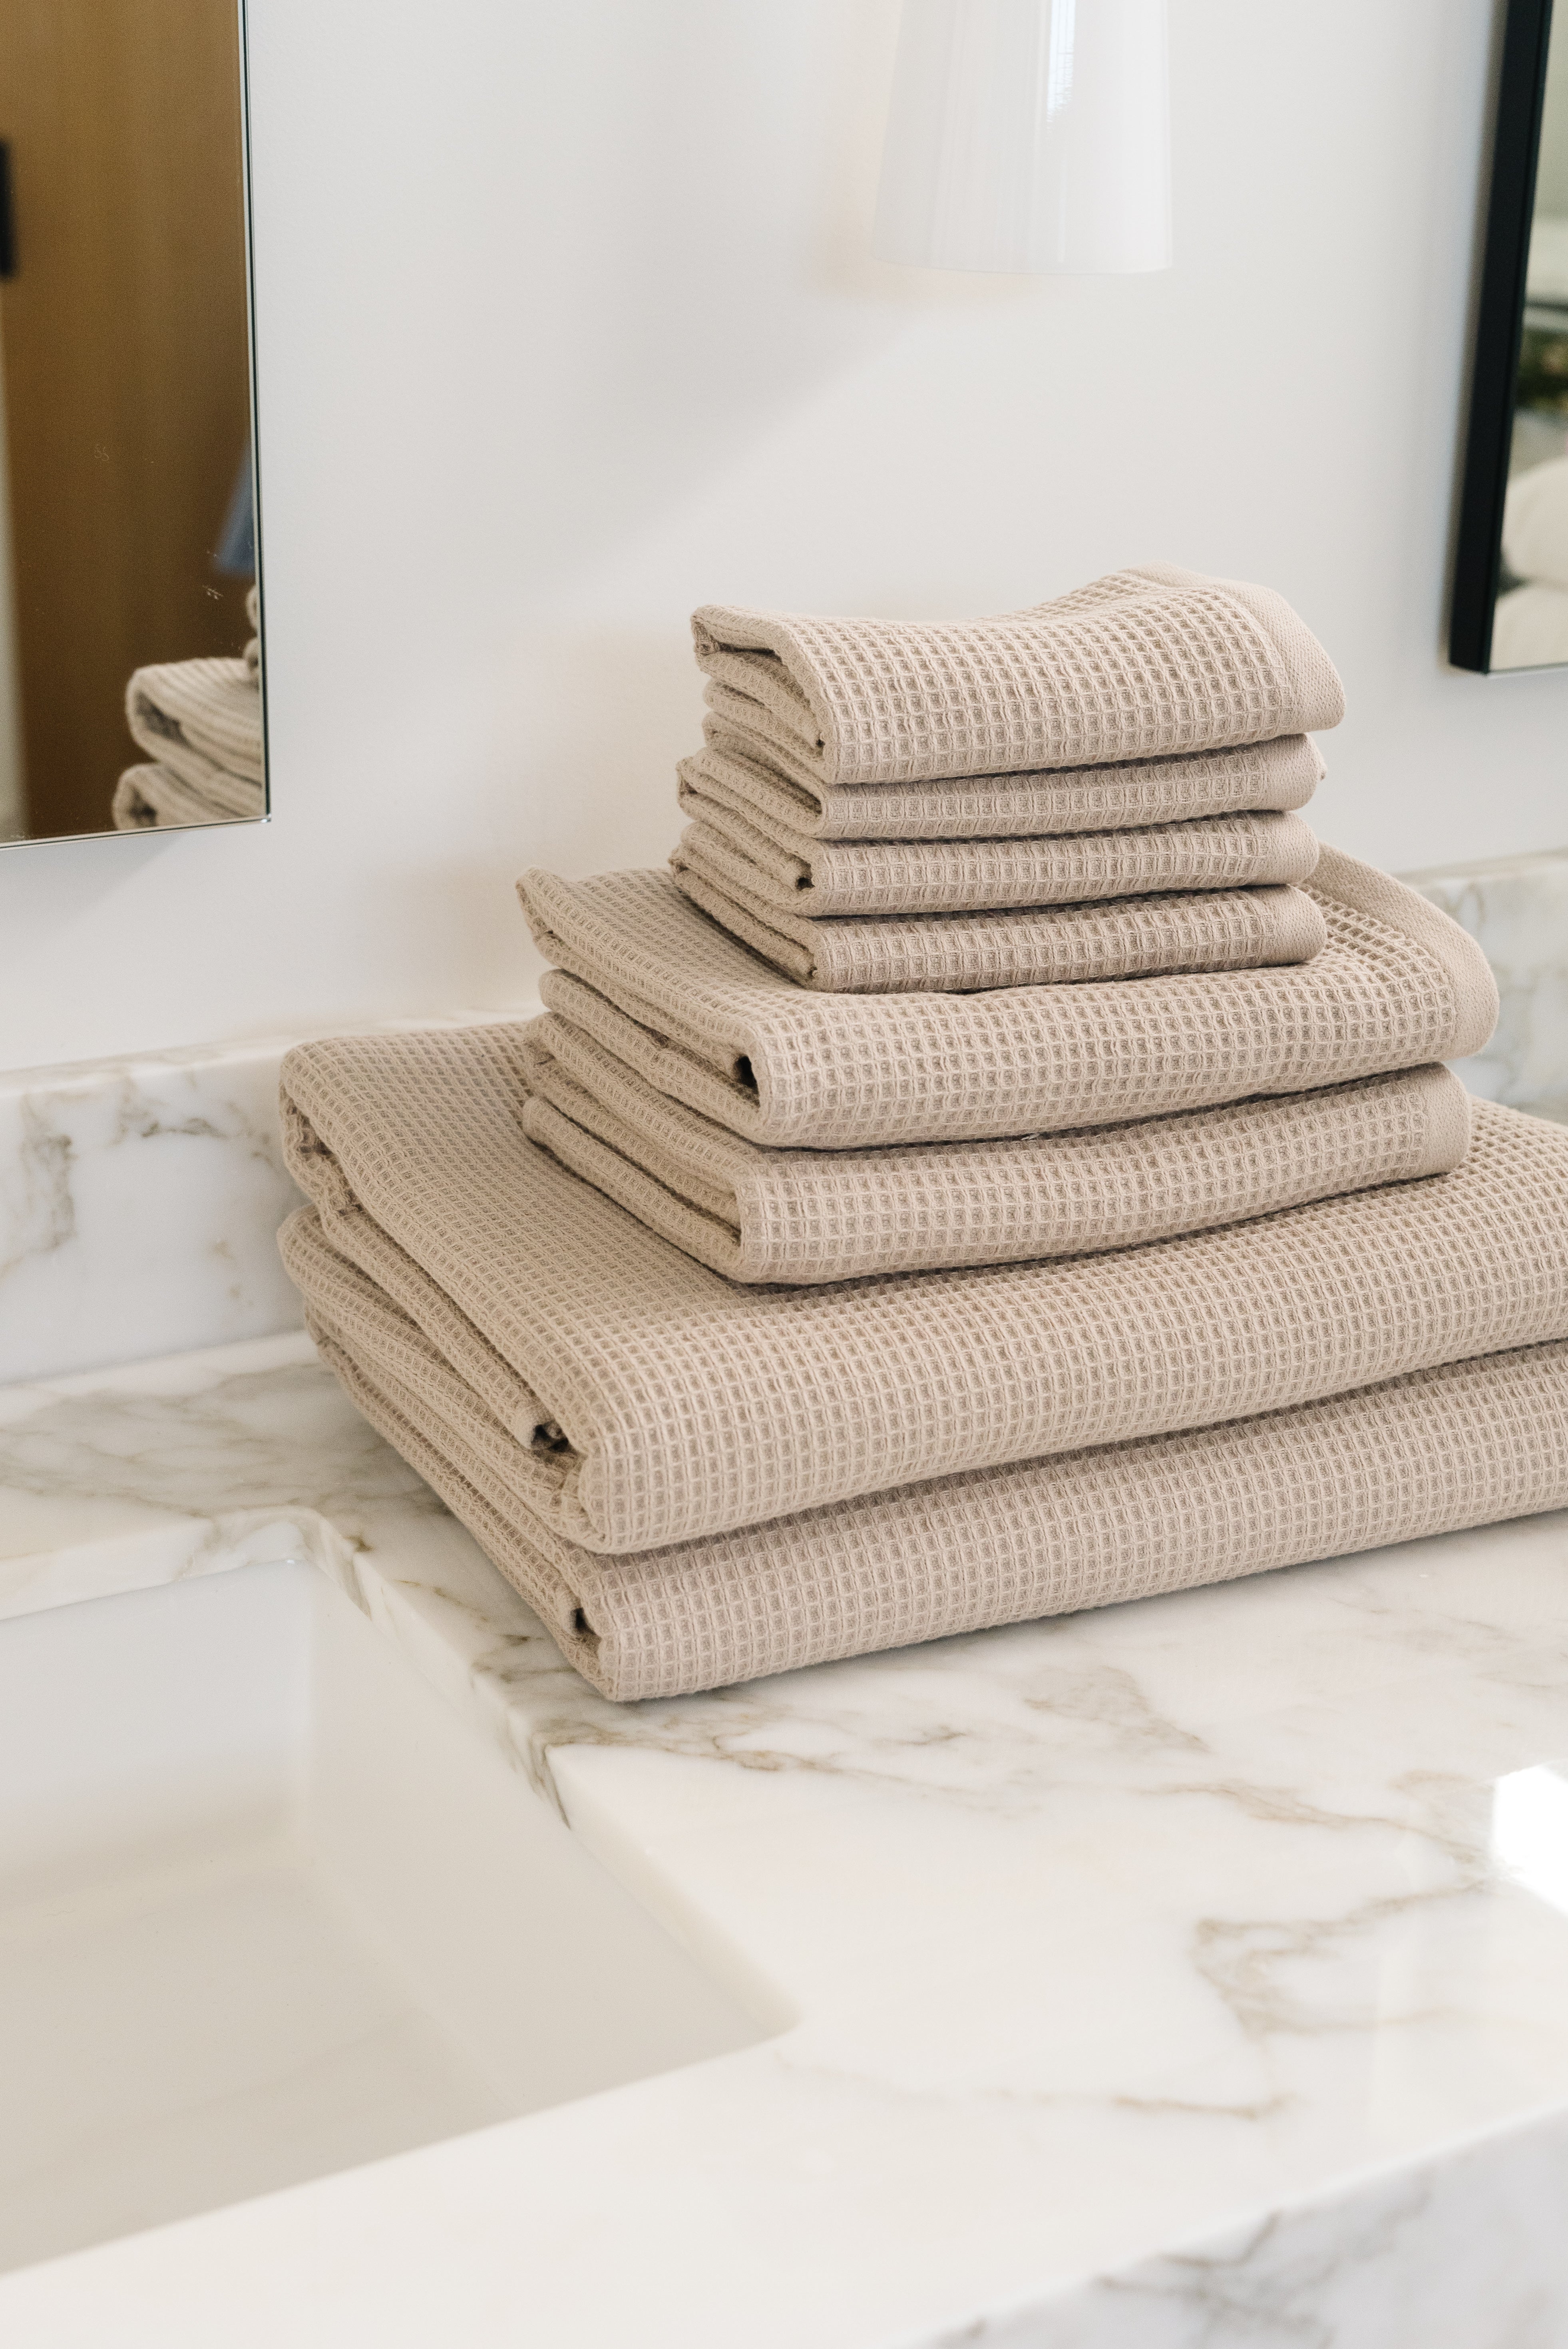 Waffle Bath Towel Set in the color Sand. Photo of Sand Waffle Bath Towel Set taken resting on a marble counter top. |Color:Sand